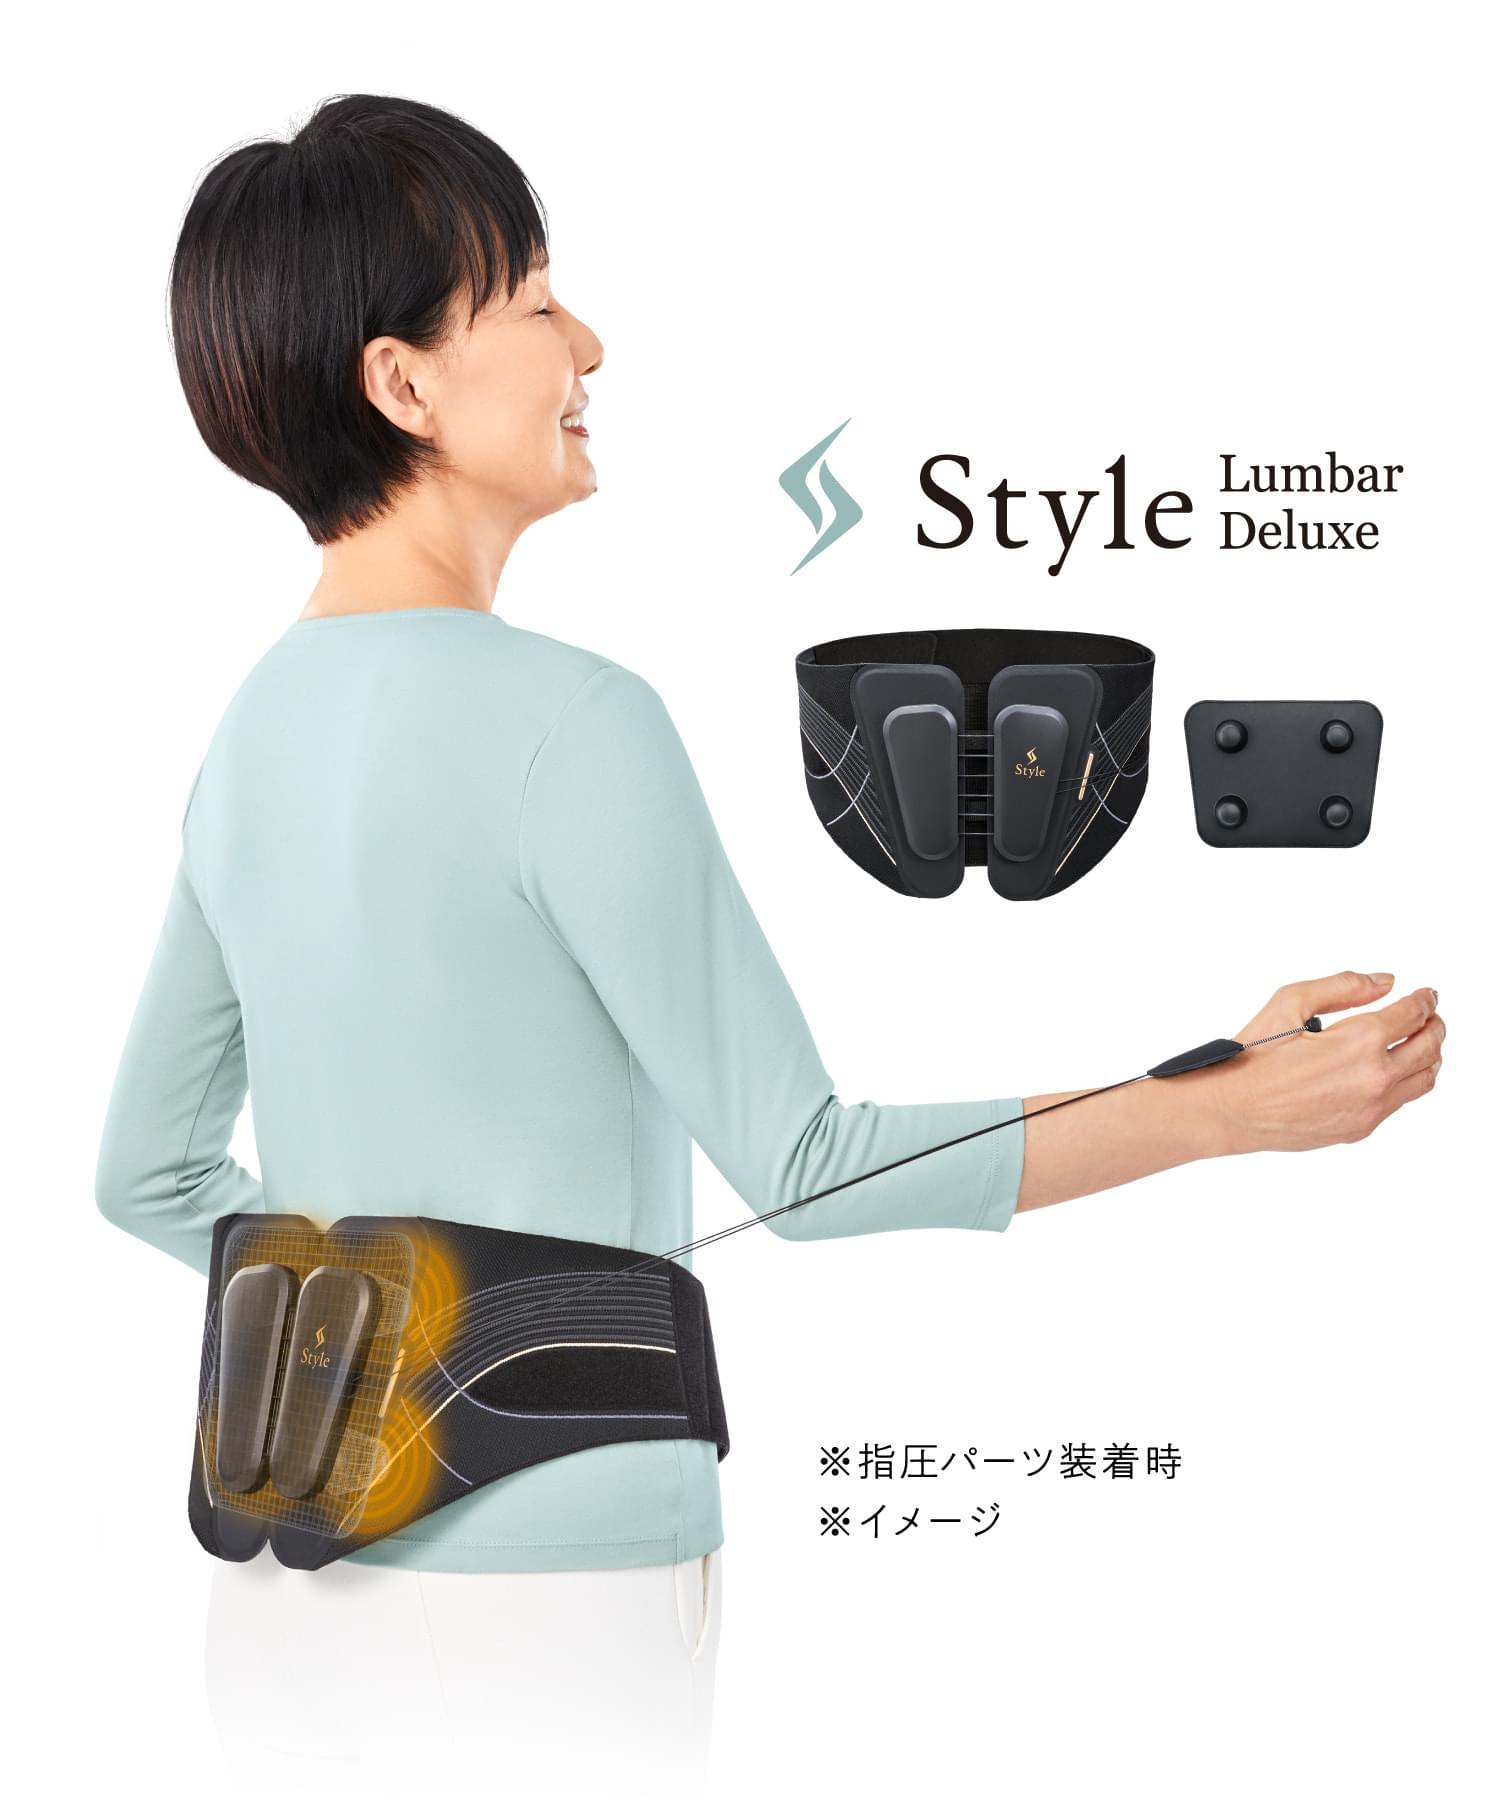 Style Lumbar Deluxe  YS-BF-03A 腰用サポートベルト